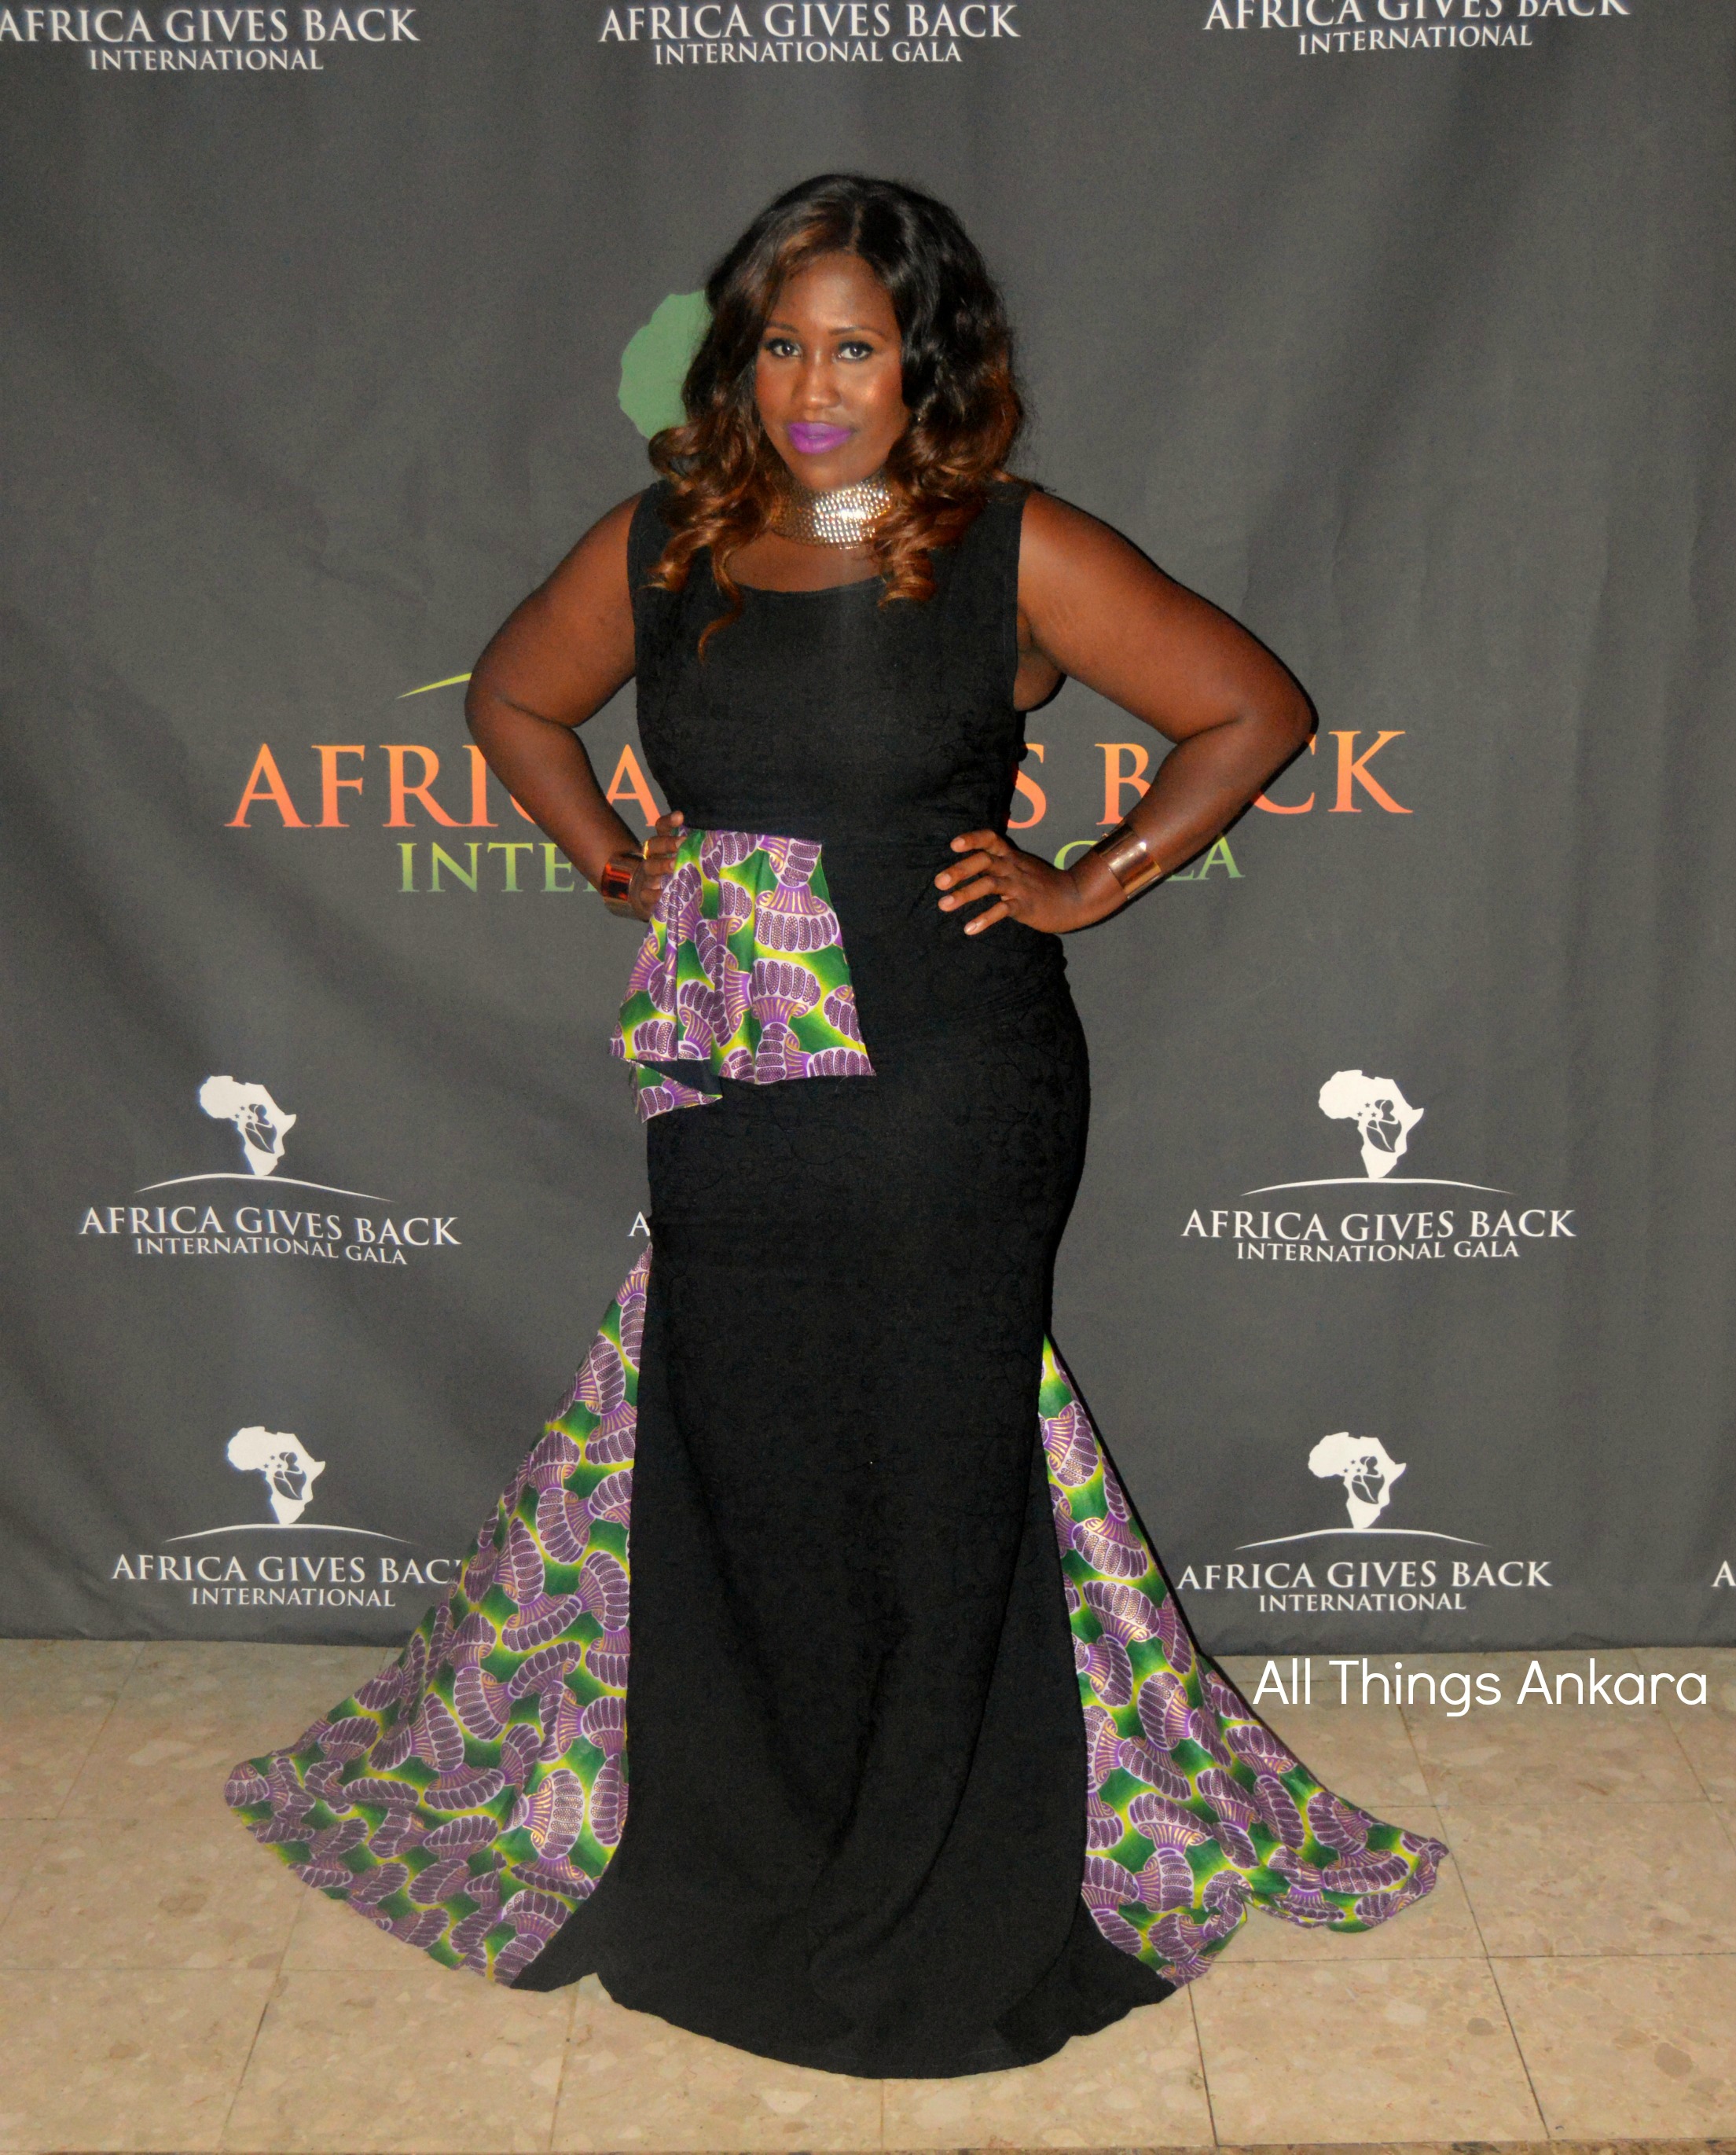 Gala-All Things Ankara's Best Dressed Women at Africa Gives Back International Gala 2016 11